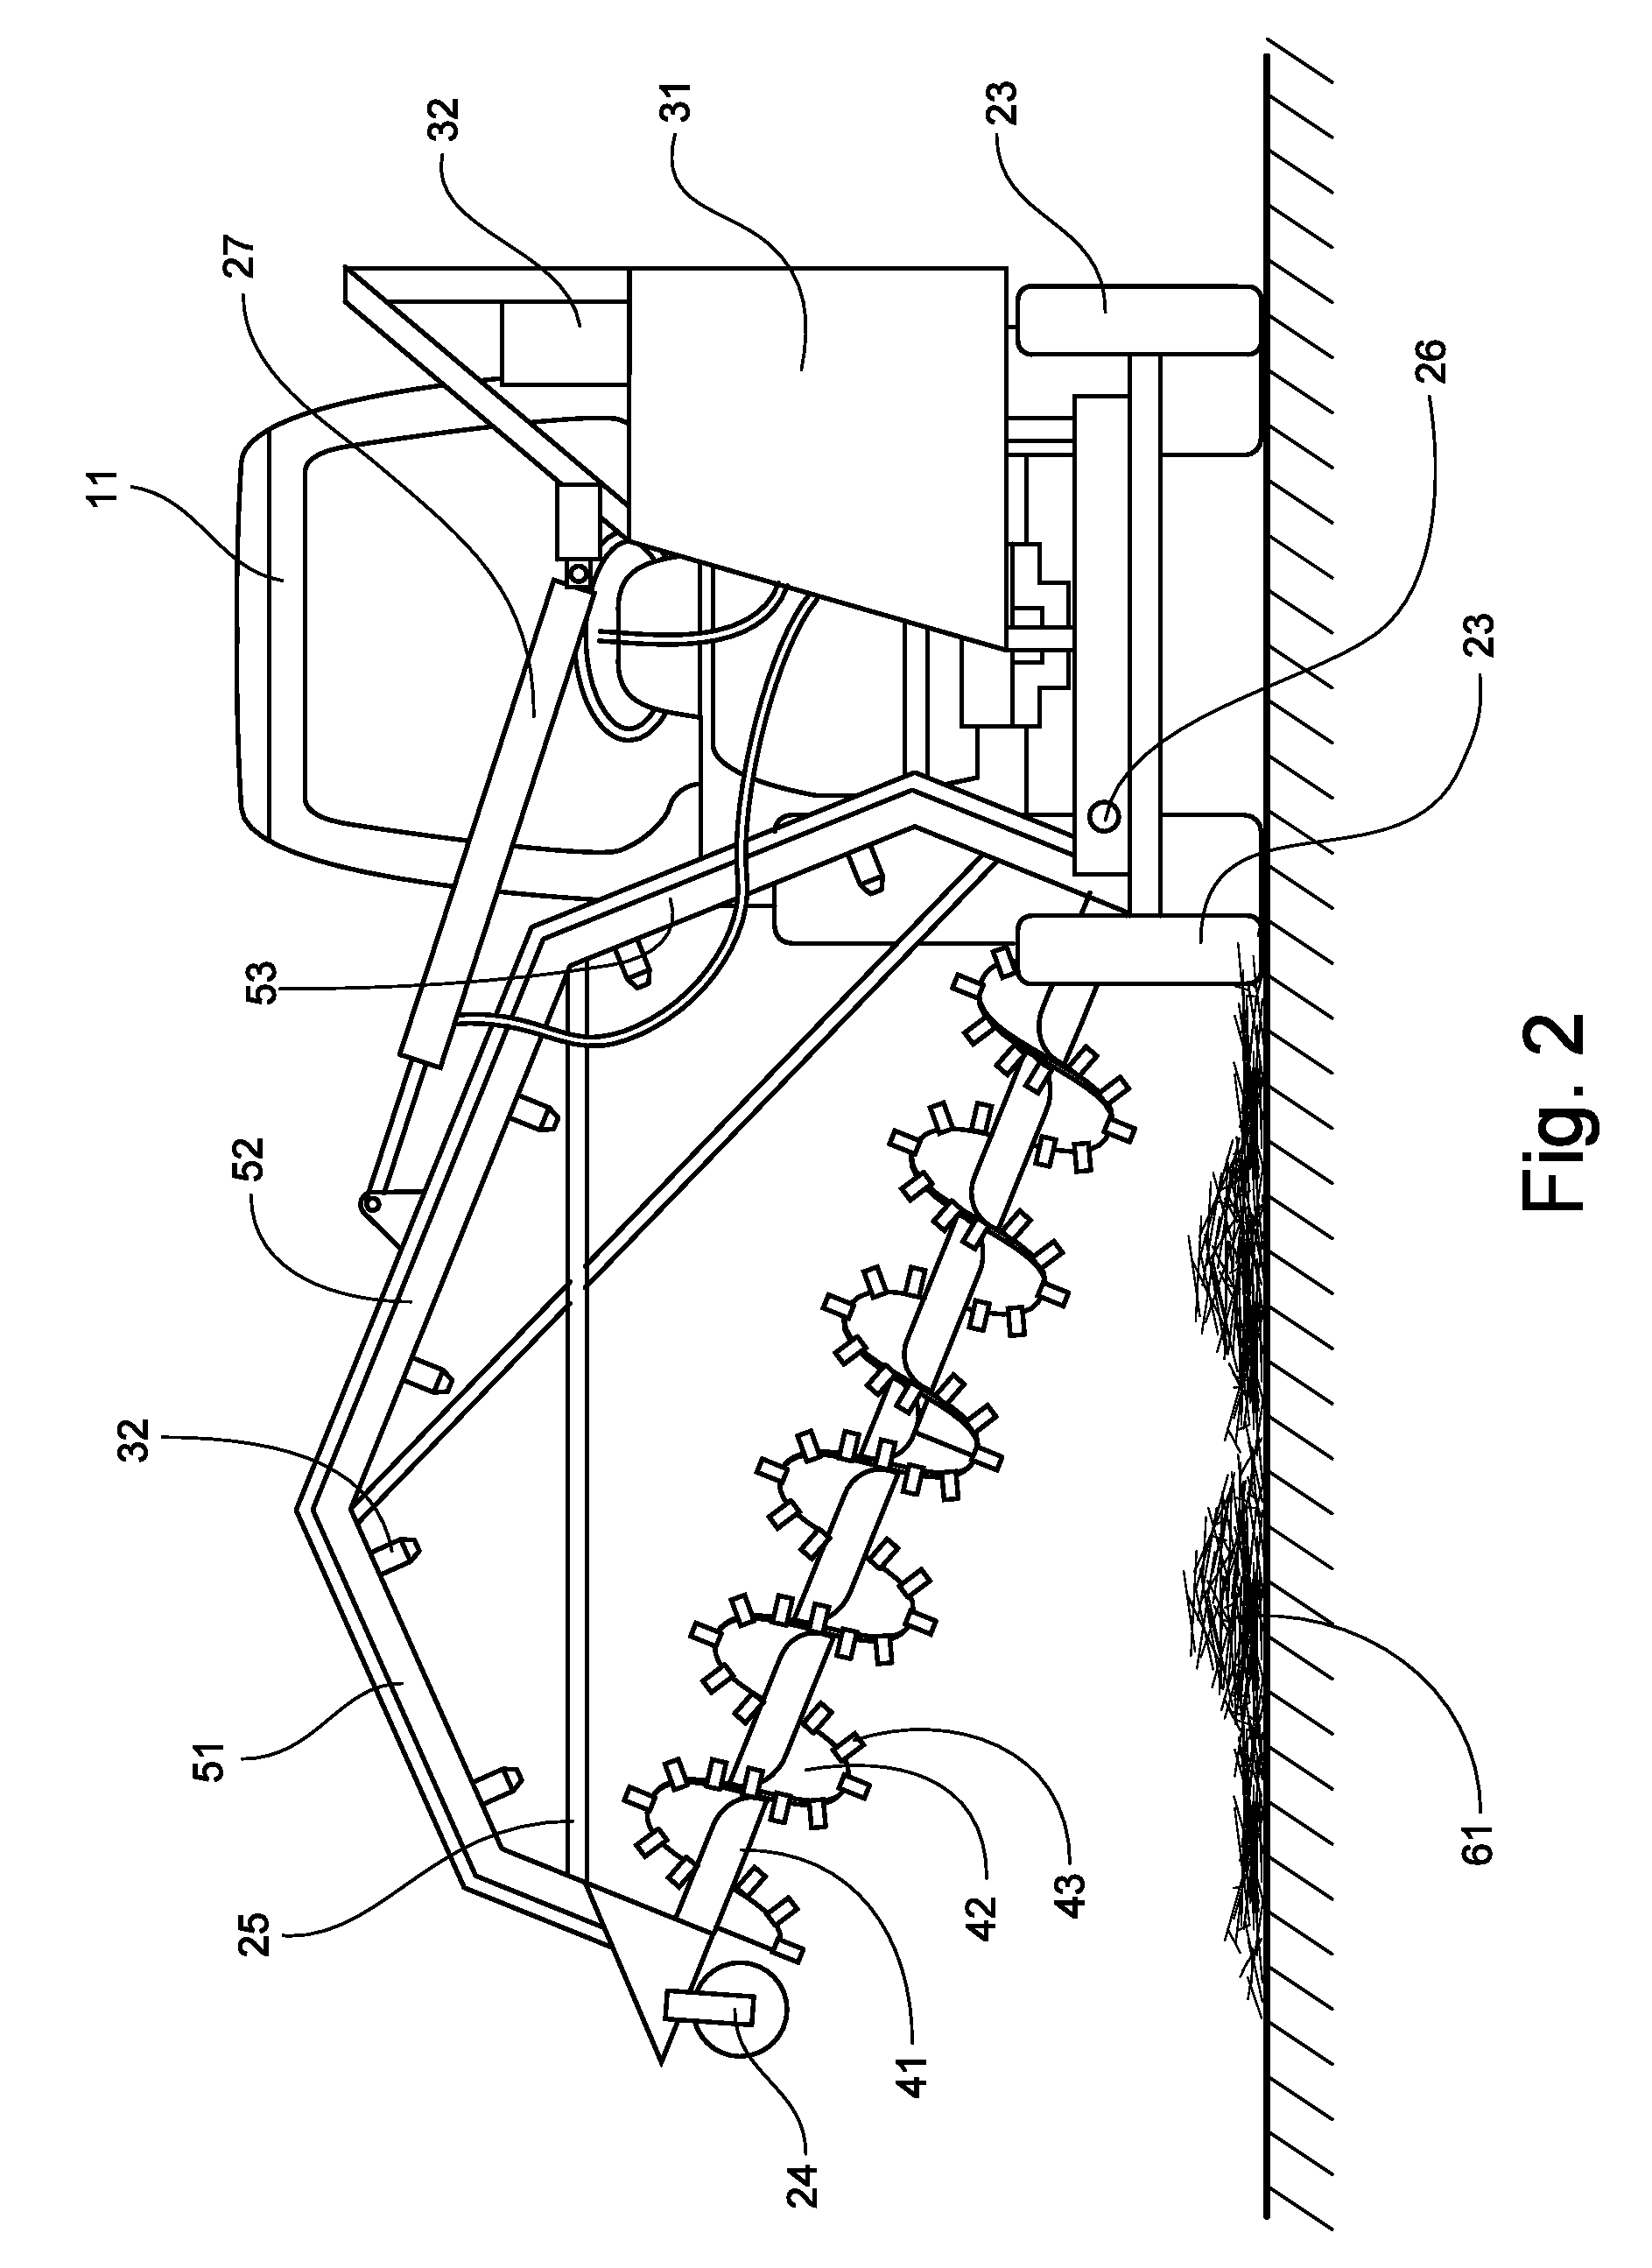 Method and Apparatus for Coating Pine Straw